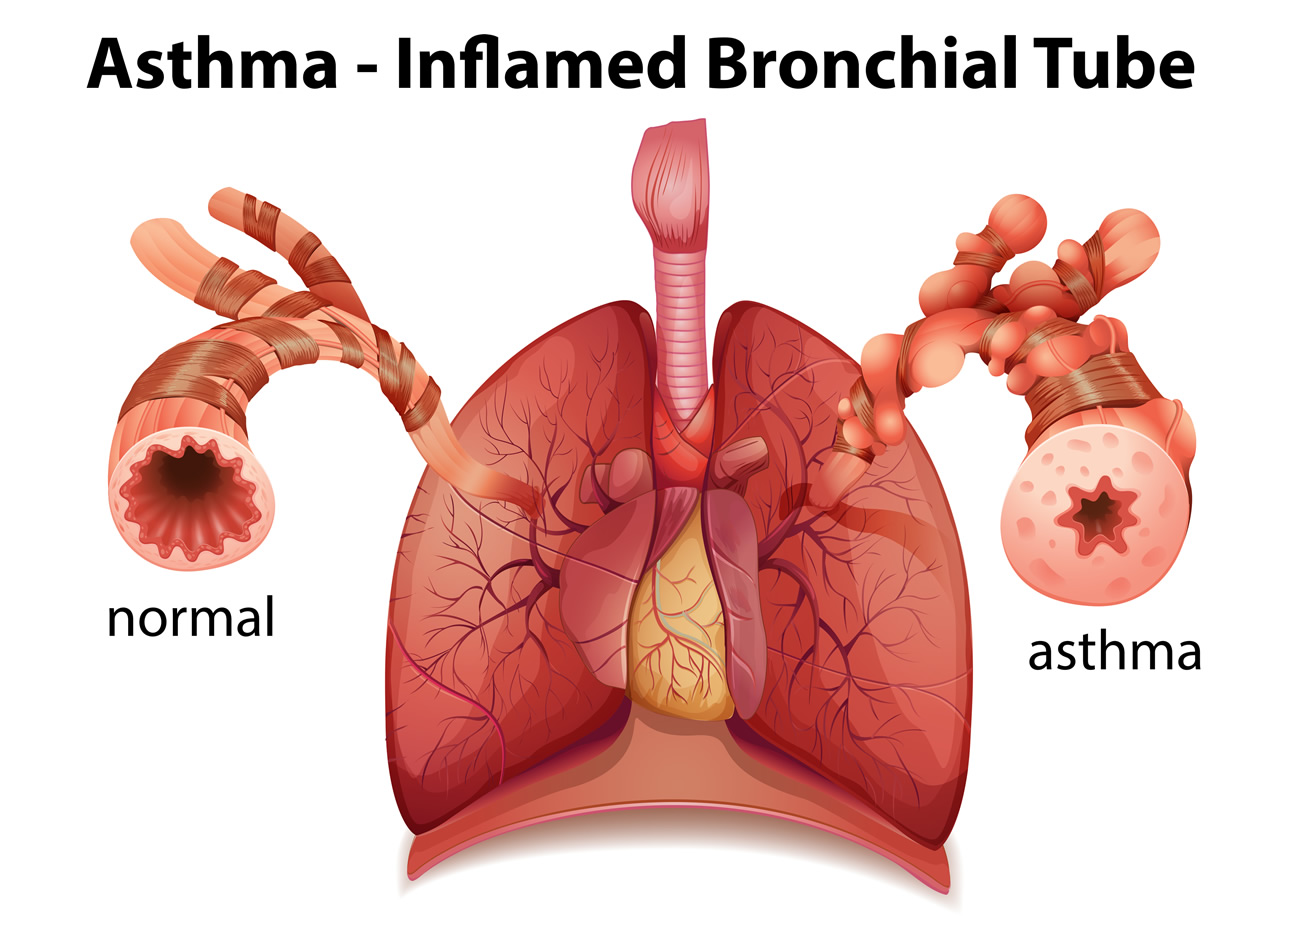 asthma-inflamed-bronchial-tube